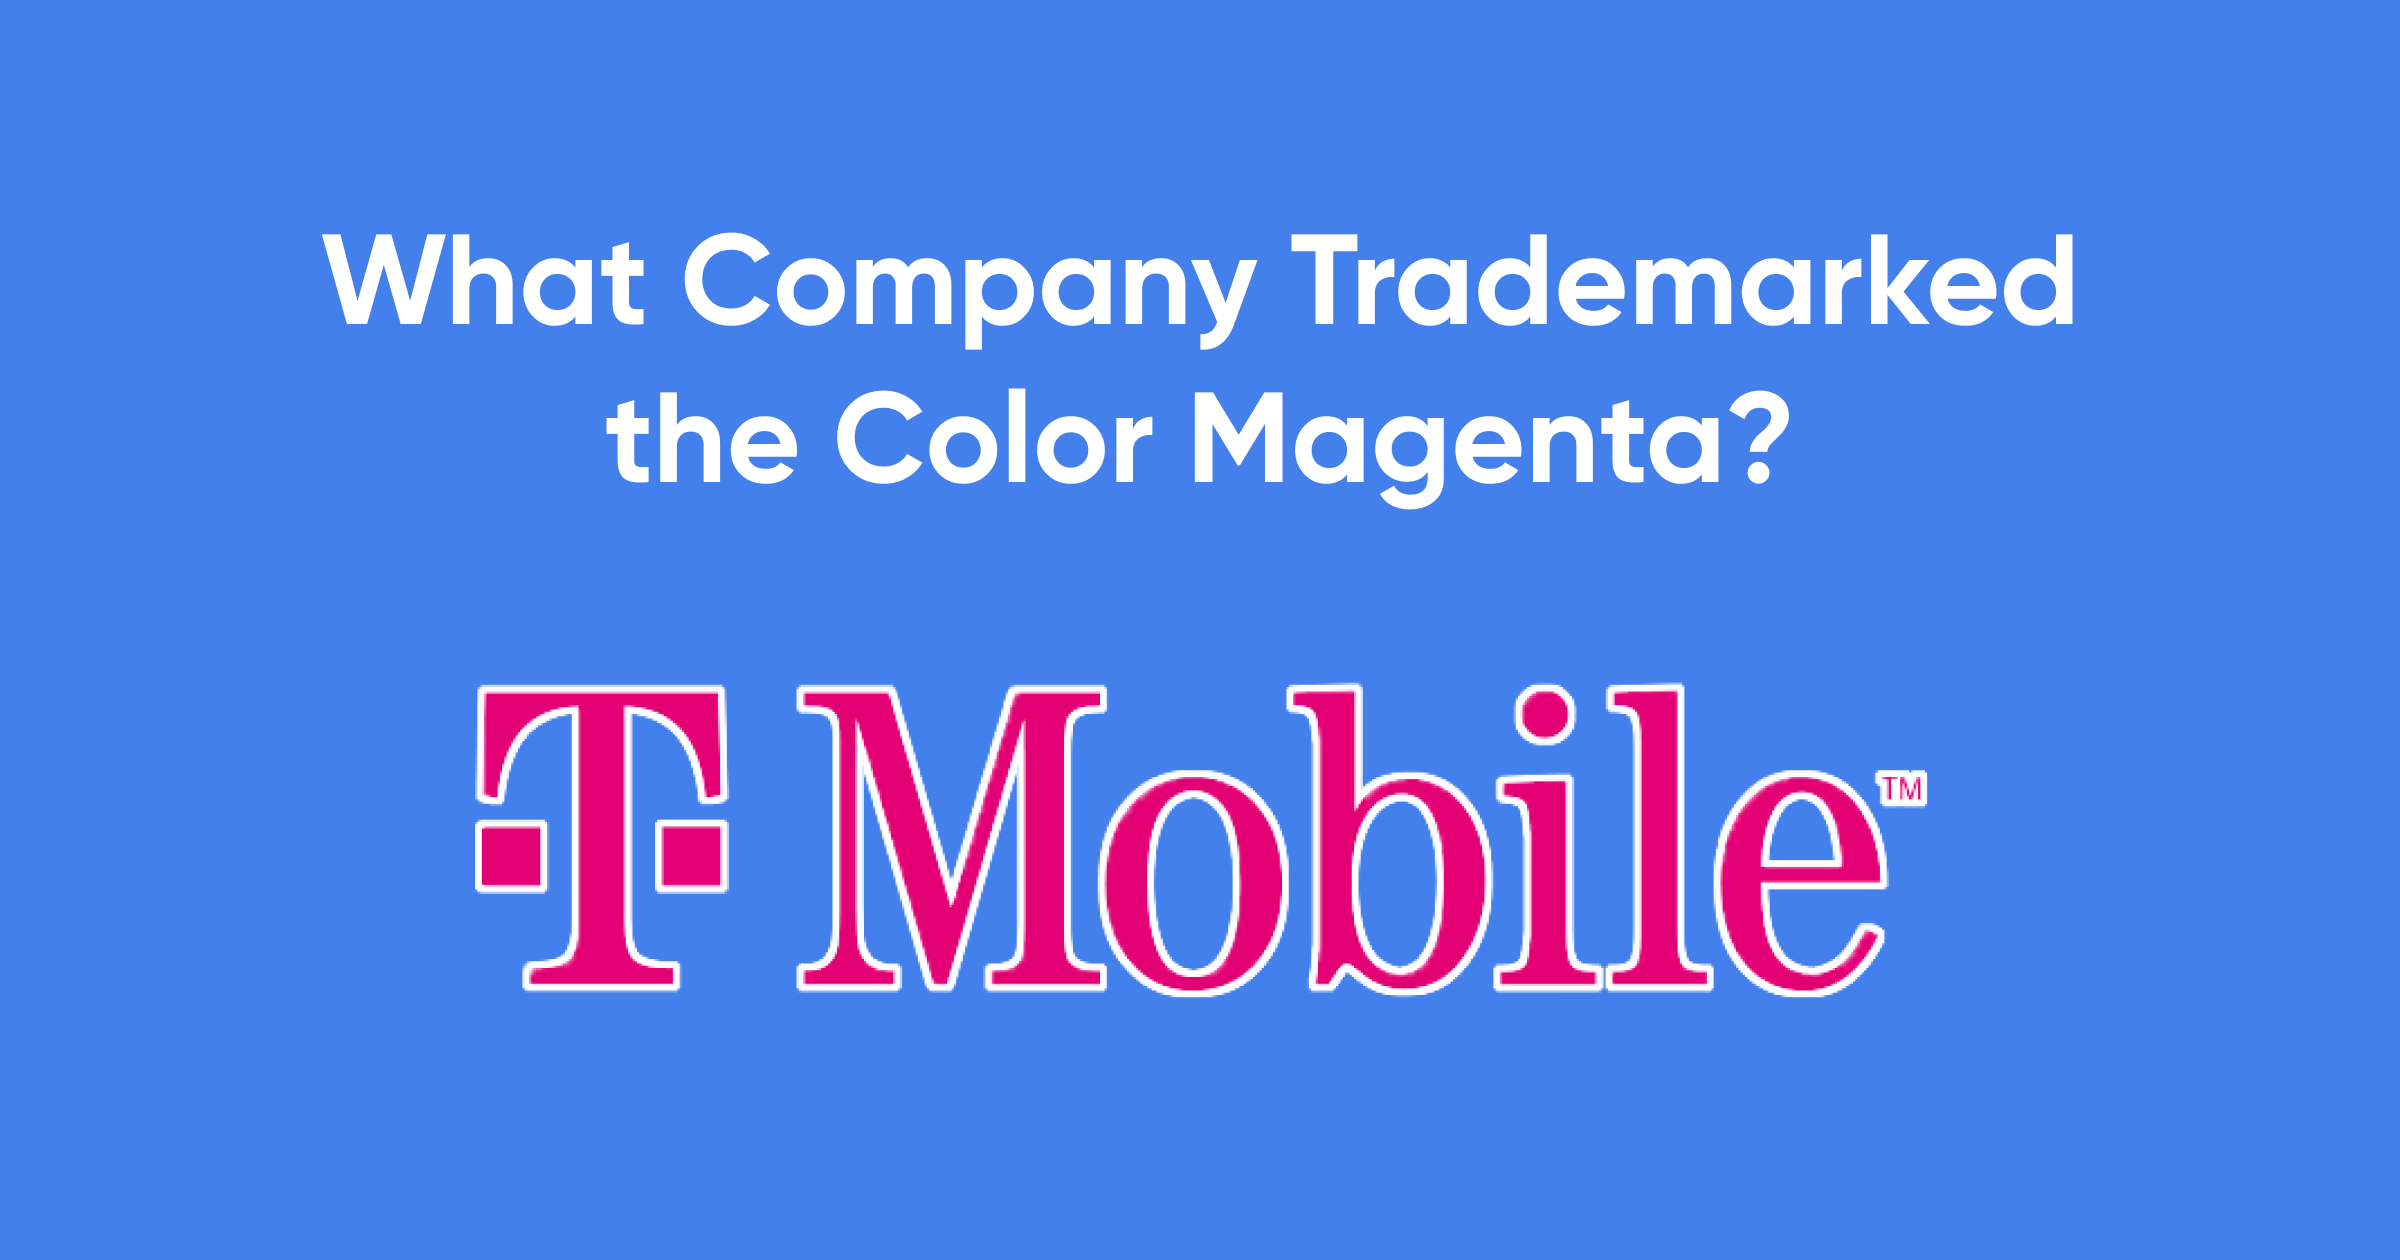 What Company Trademarked the Color Magenta?